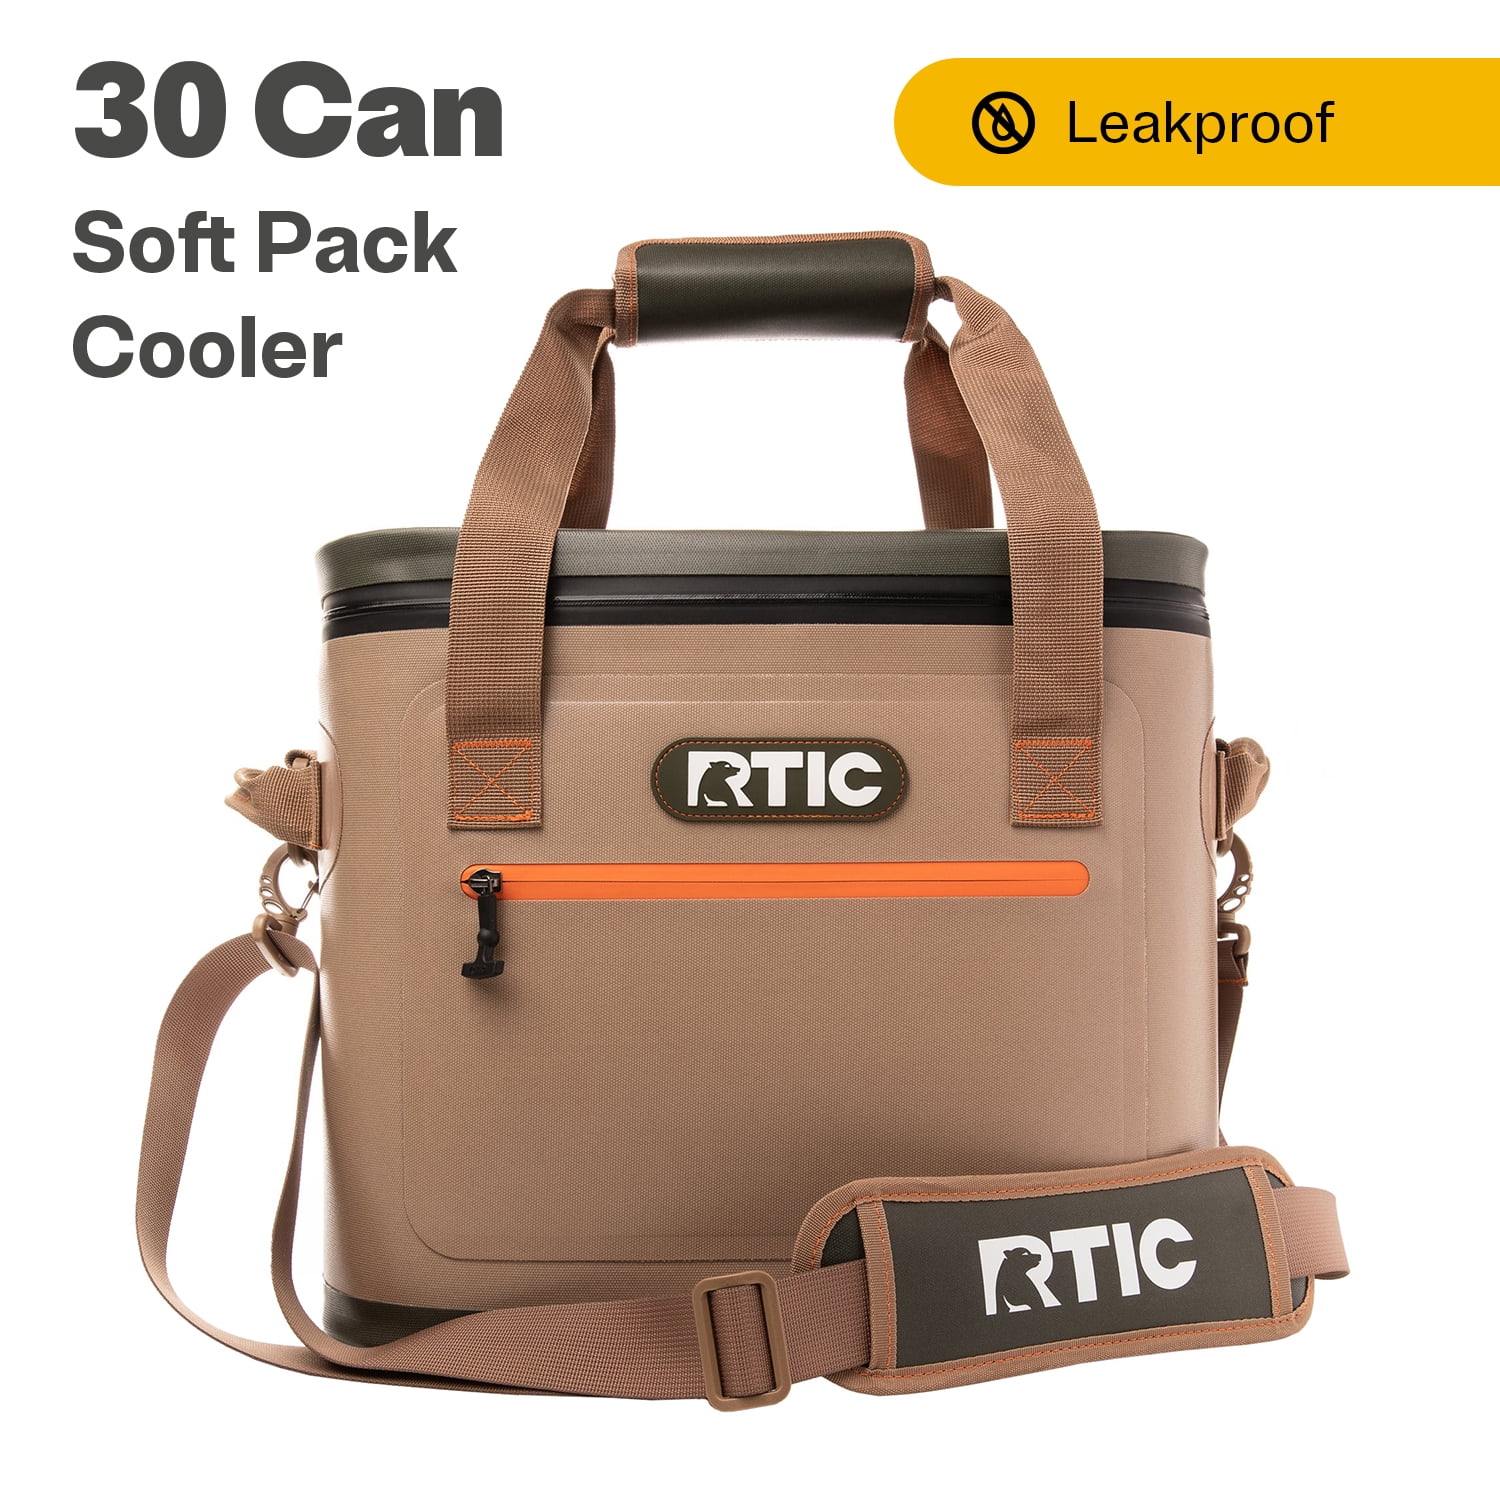 RTIC 30 Can Soft Pack Cooler, Leakproof Ice Chest Cooler with Waterproof Zipper, Tan - image 1 of 11